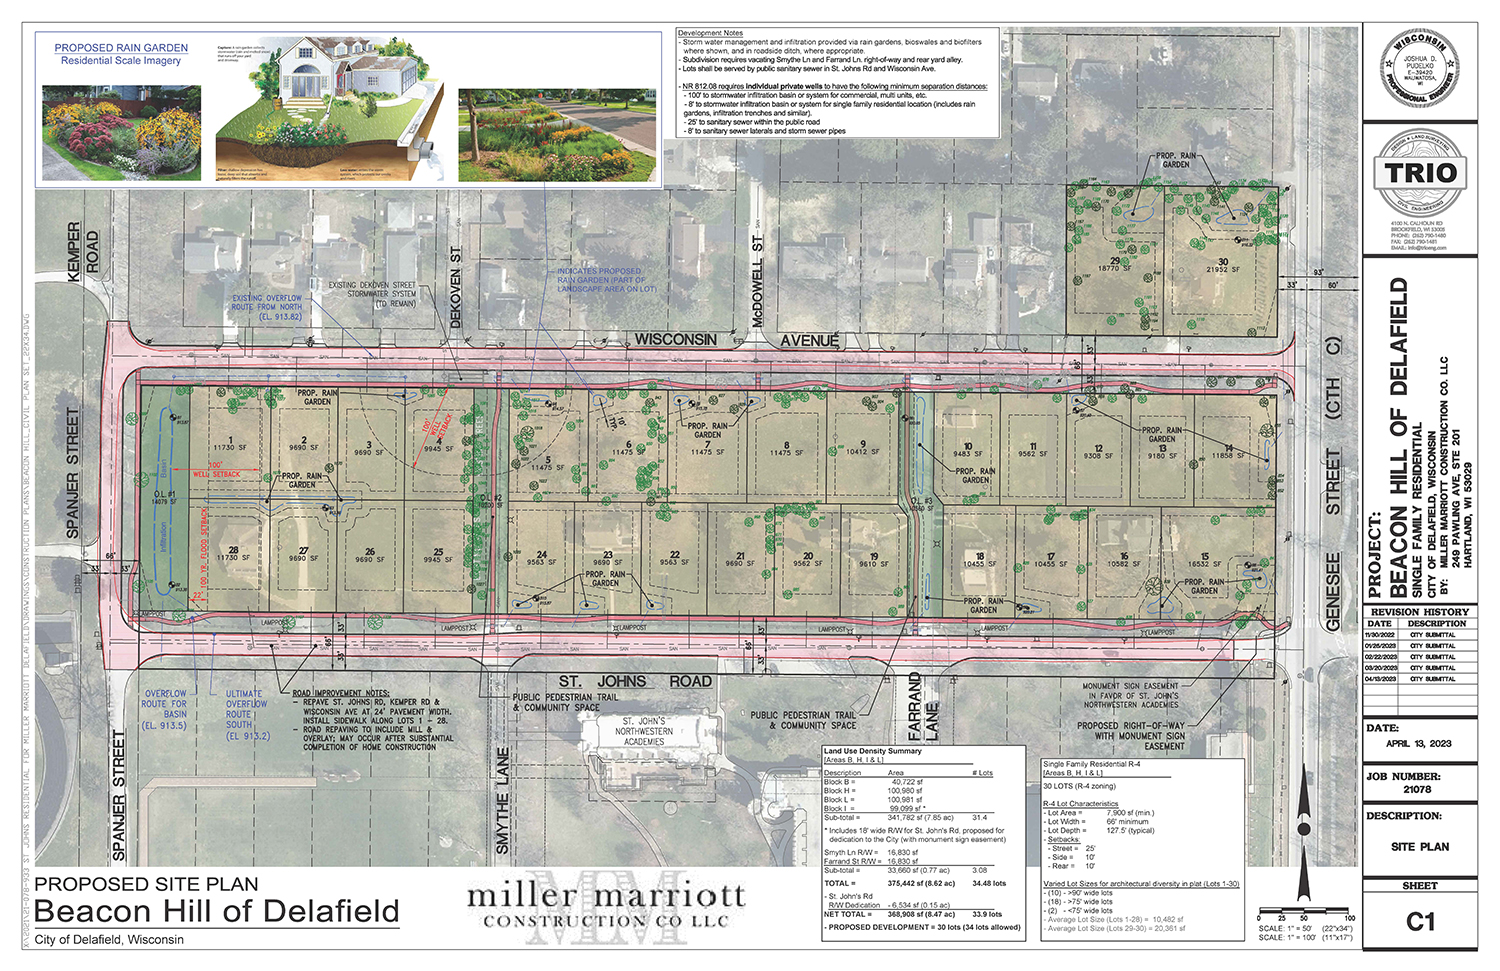 Final Site Plan of Beacon Hill of Delafield